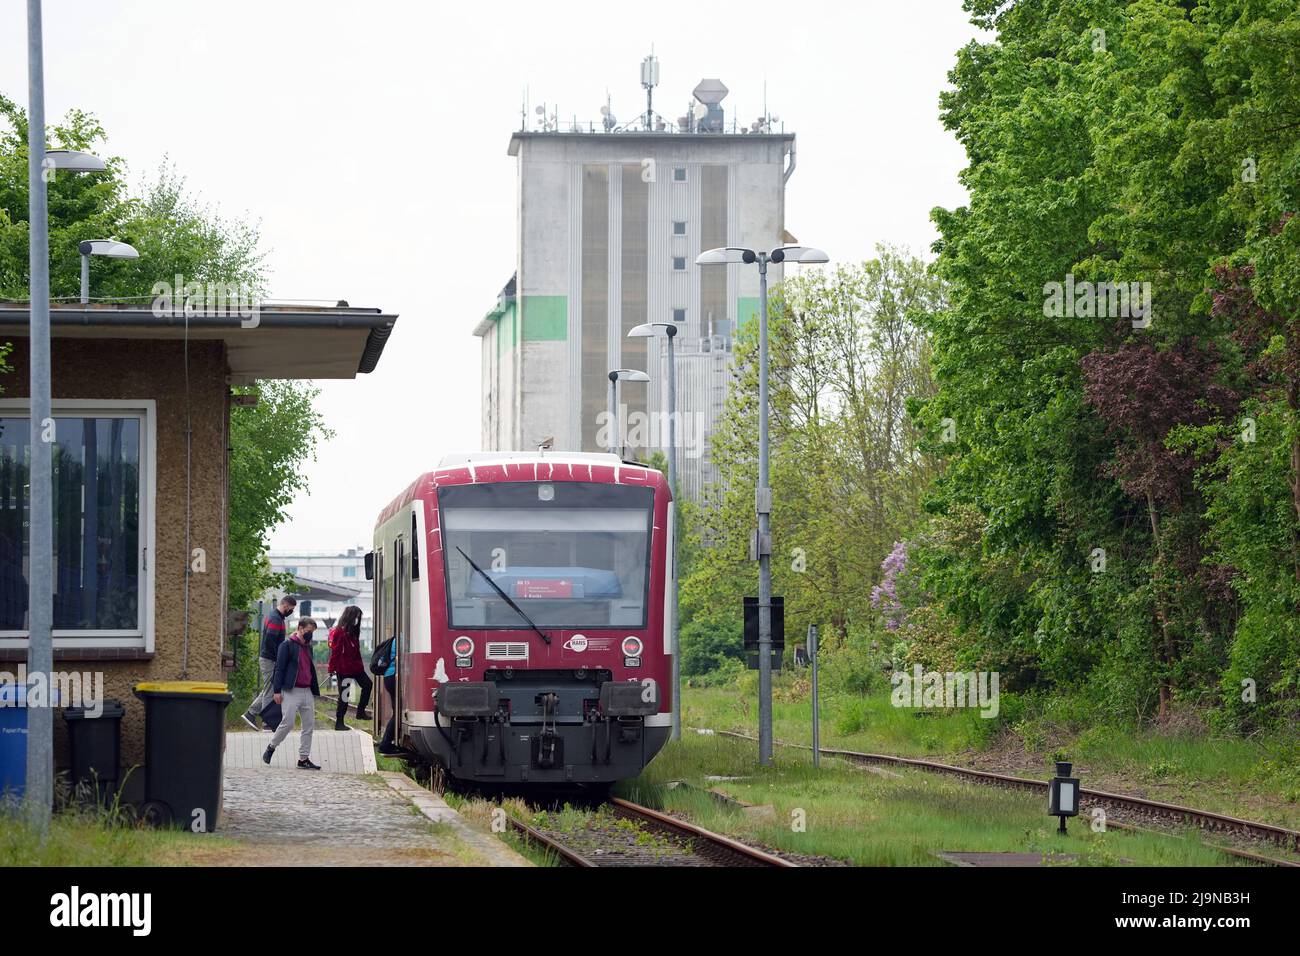 Kyritz, Germany. 11th May, 2022. A rail bus of the line RB73 of the Hanseatische Eisenbahn GmbH (Hans) drives in the direction of the station and further to Neustadt (Dosse). The vehicle is an LVT/s railcar manufactured by Waggonbau Bautzen, which is the successor to the railbuses called 'Ferkeltaxe' in the GDR. Credit: Soeren Stache/dpa/Alamy Live News Stock Photo